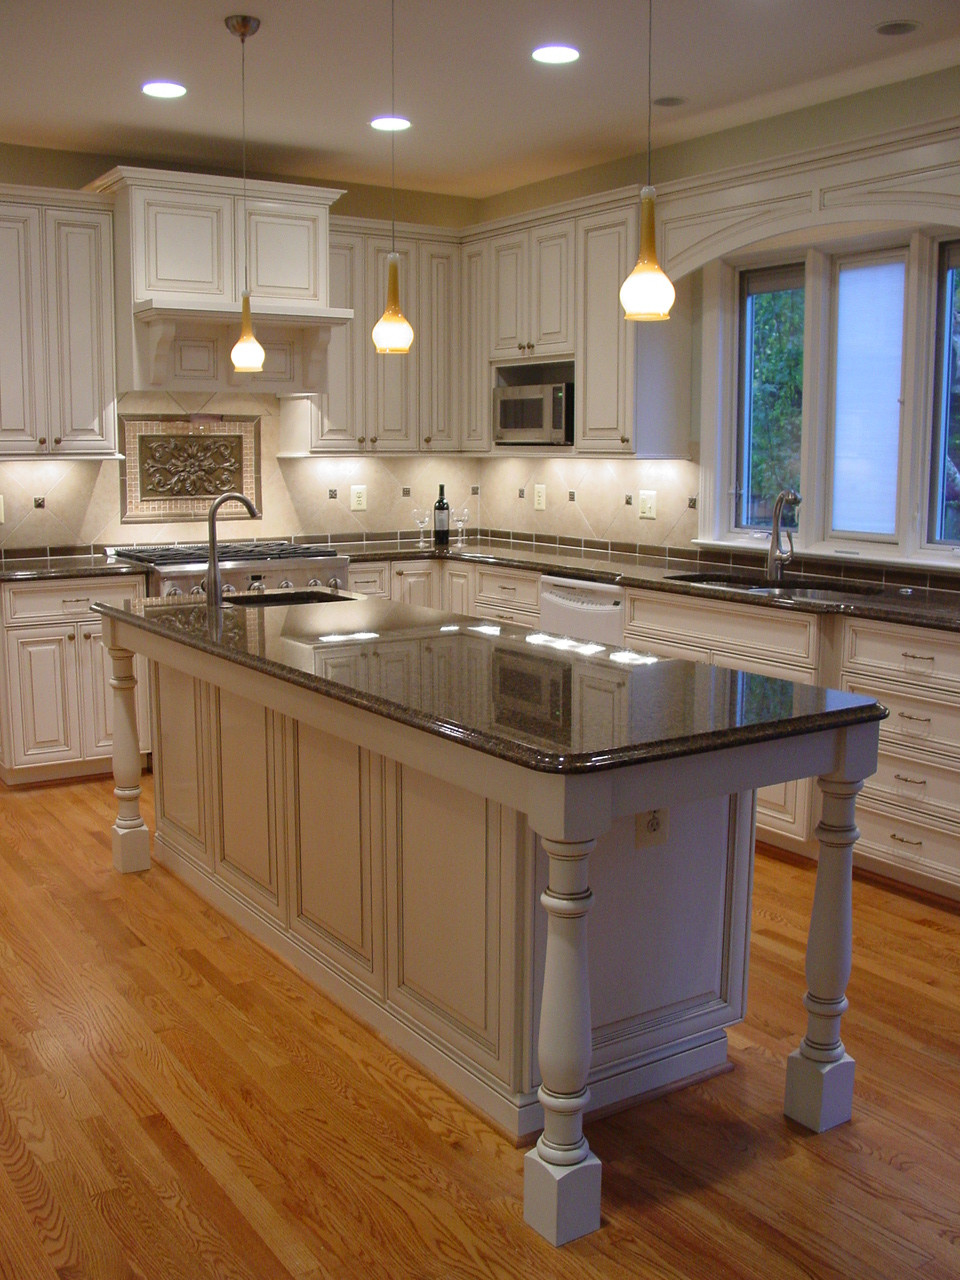 Kitchen Remodeling Photo
 Kitchen Trends for 2015